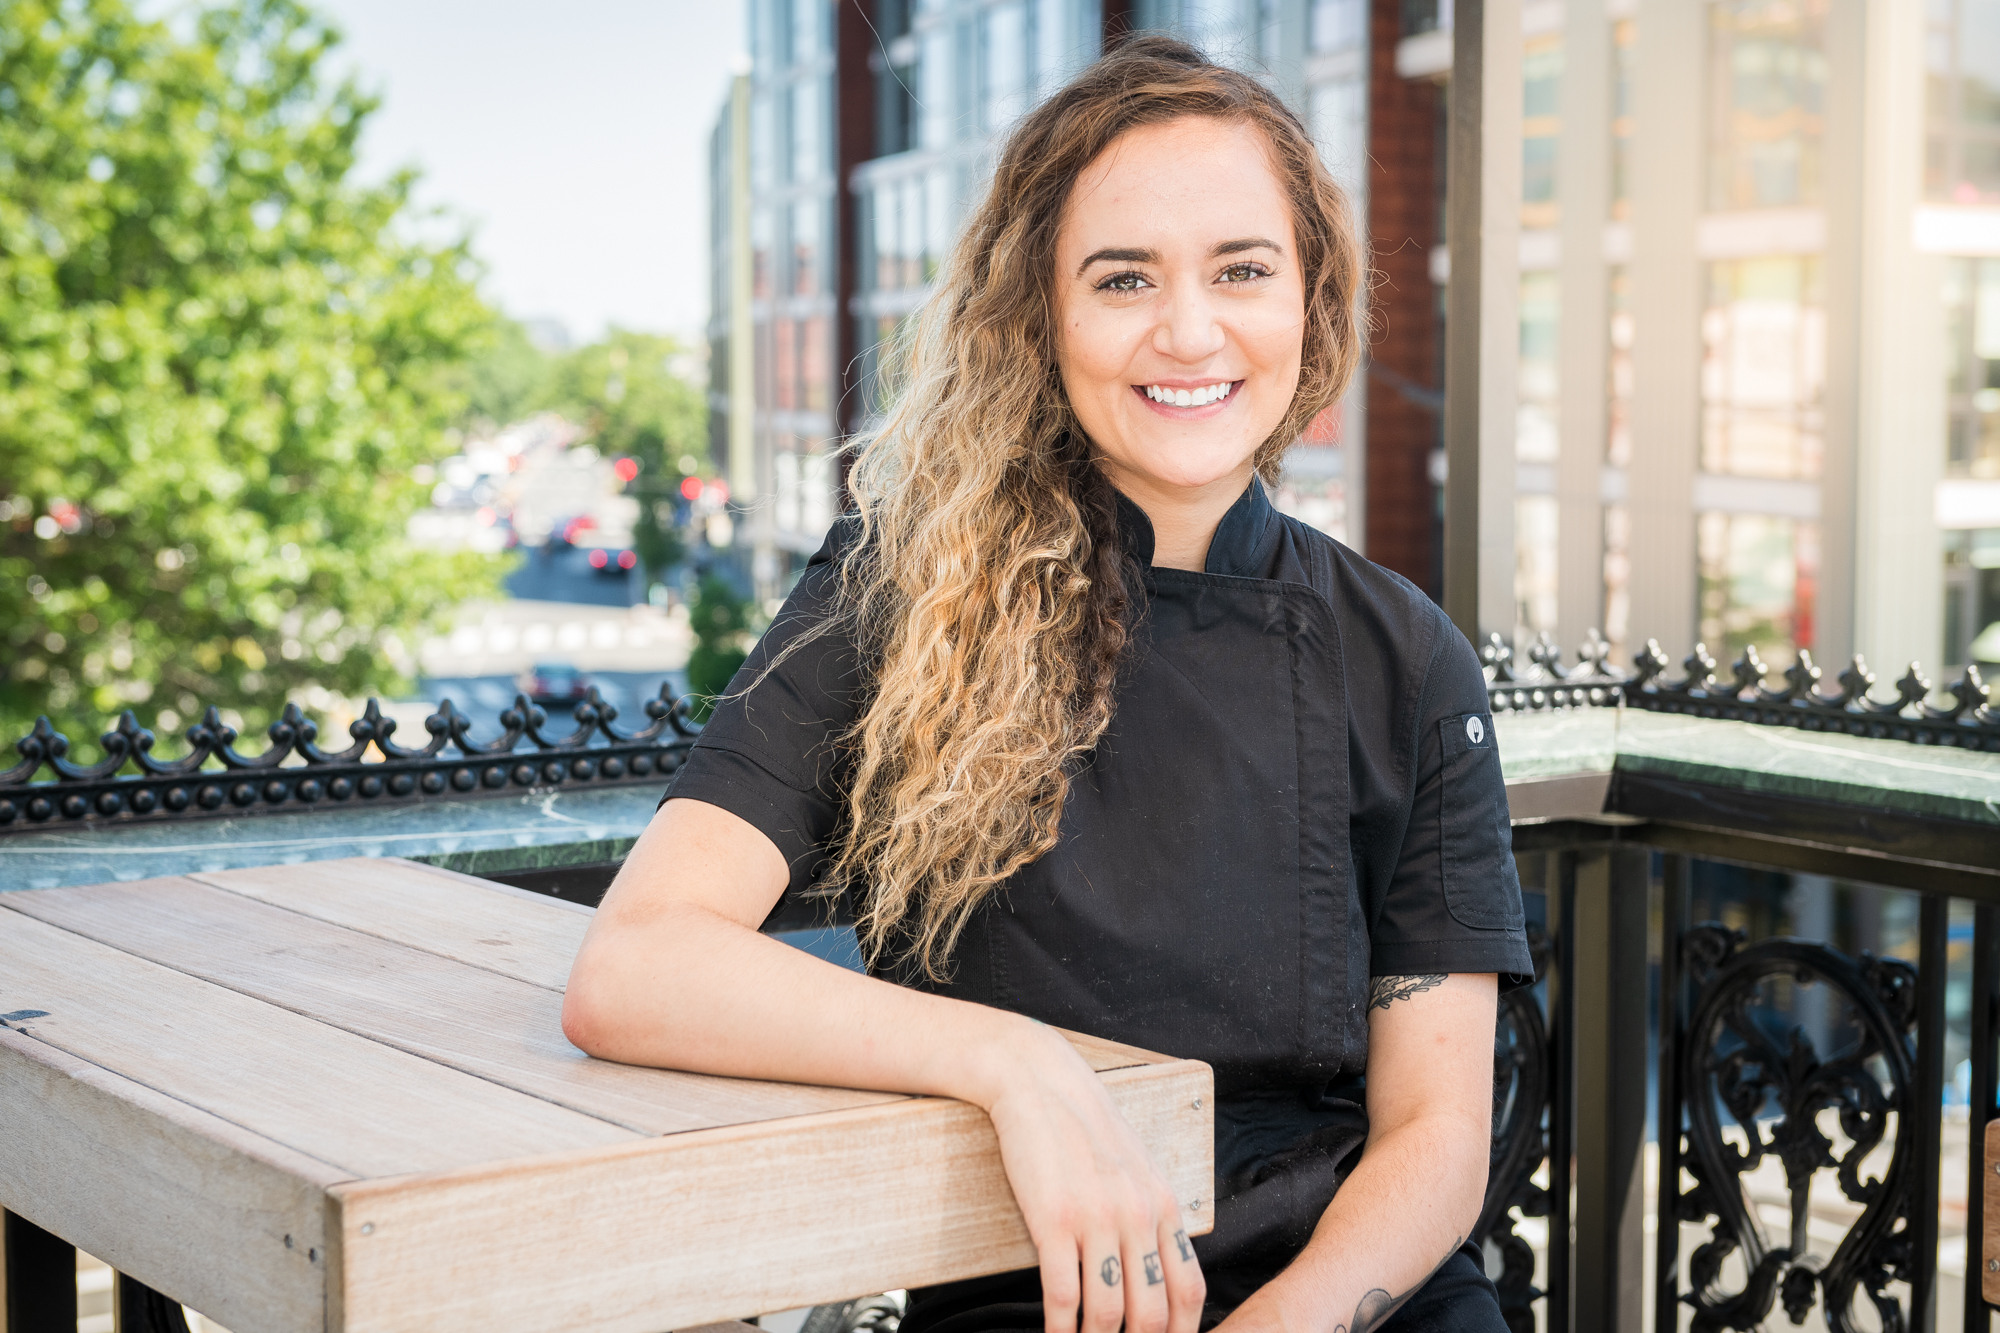 Casey Bauer, 25, has come up with her version of Lebanese bar food at Coin Mezze